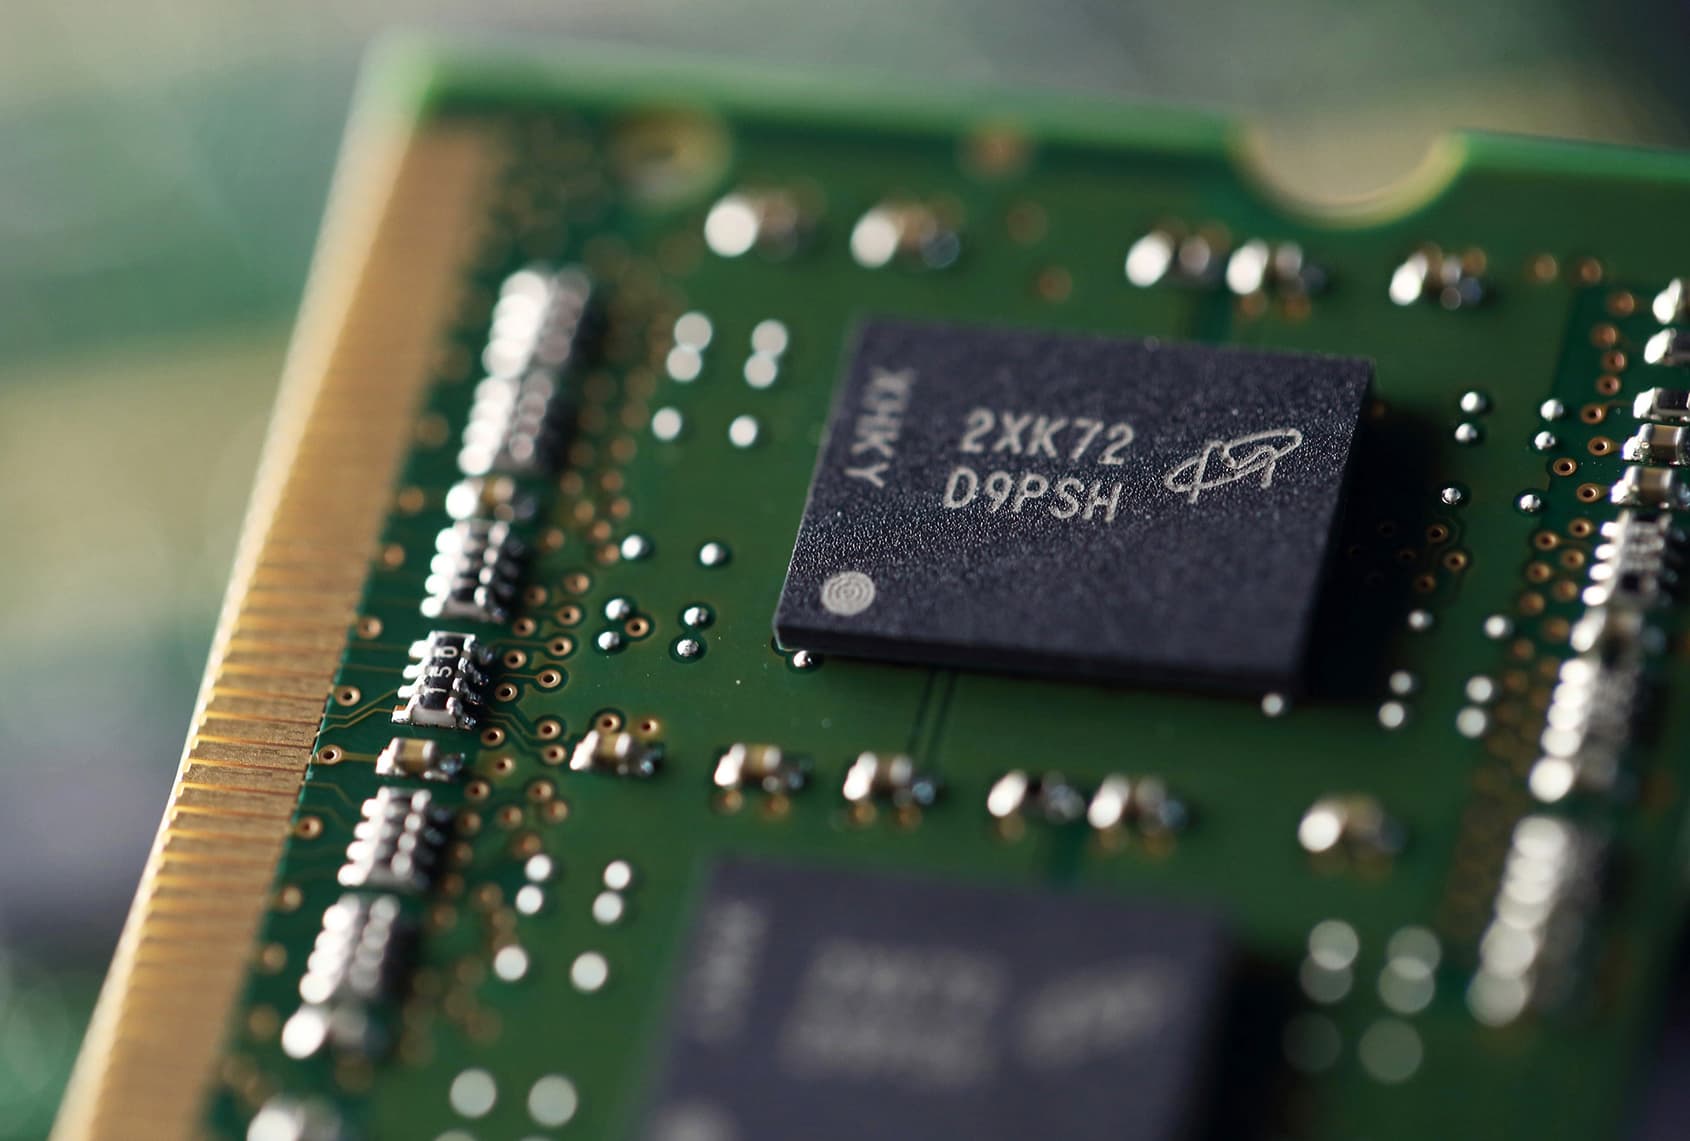 China’s chip stocks rise after Beijing says Micron is ‘security risk’